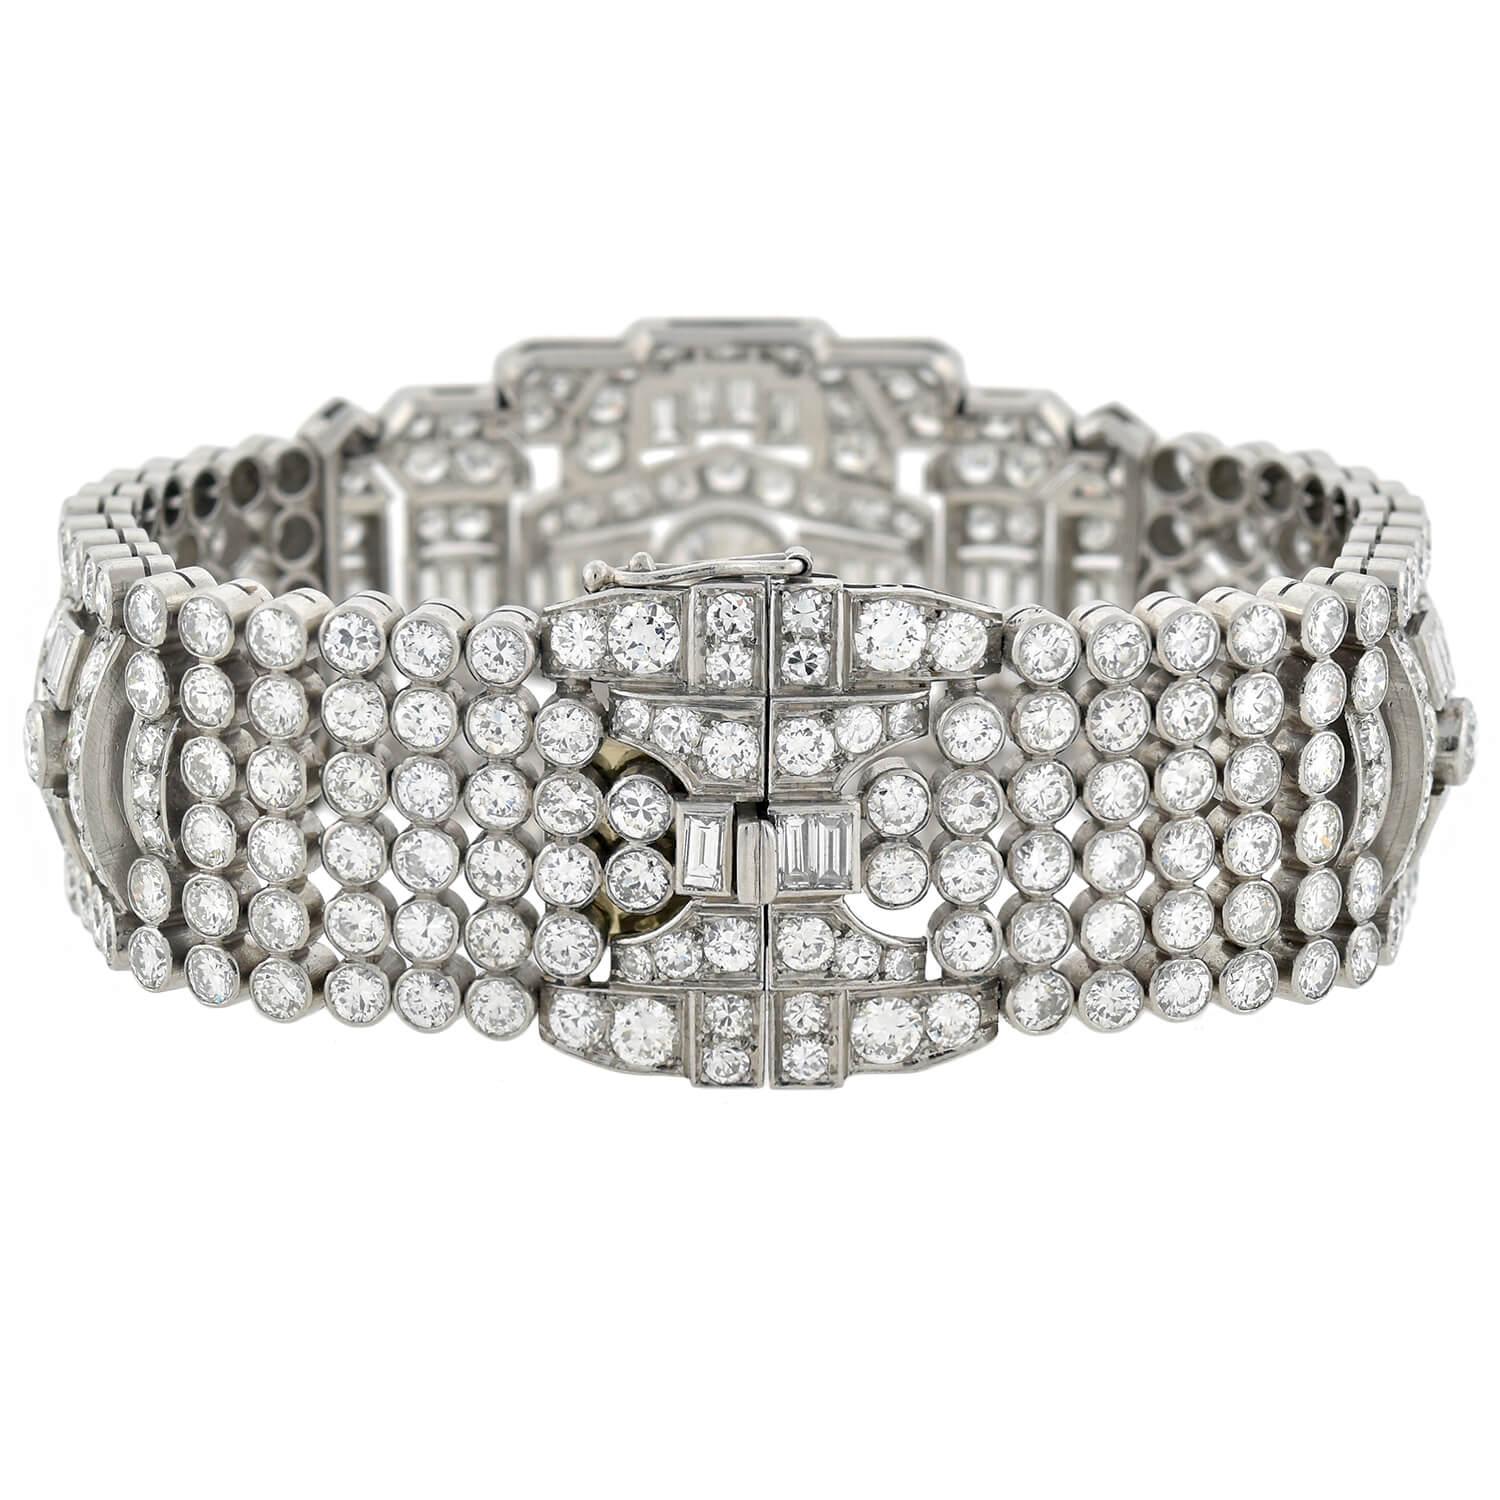 A Red Carpet worthy diamond encrusted bracelet from the Retro (ca1940) era! This absolutely exquisite piece is crafted in platinum and features a wide, flexible surface of diamond encrusted links, which interlock to form a fantastic and dramatic